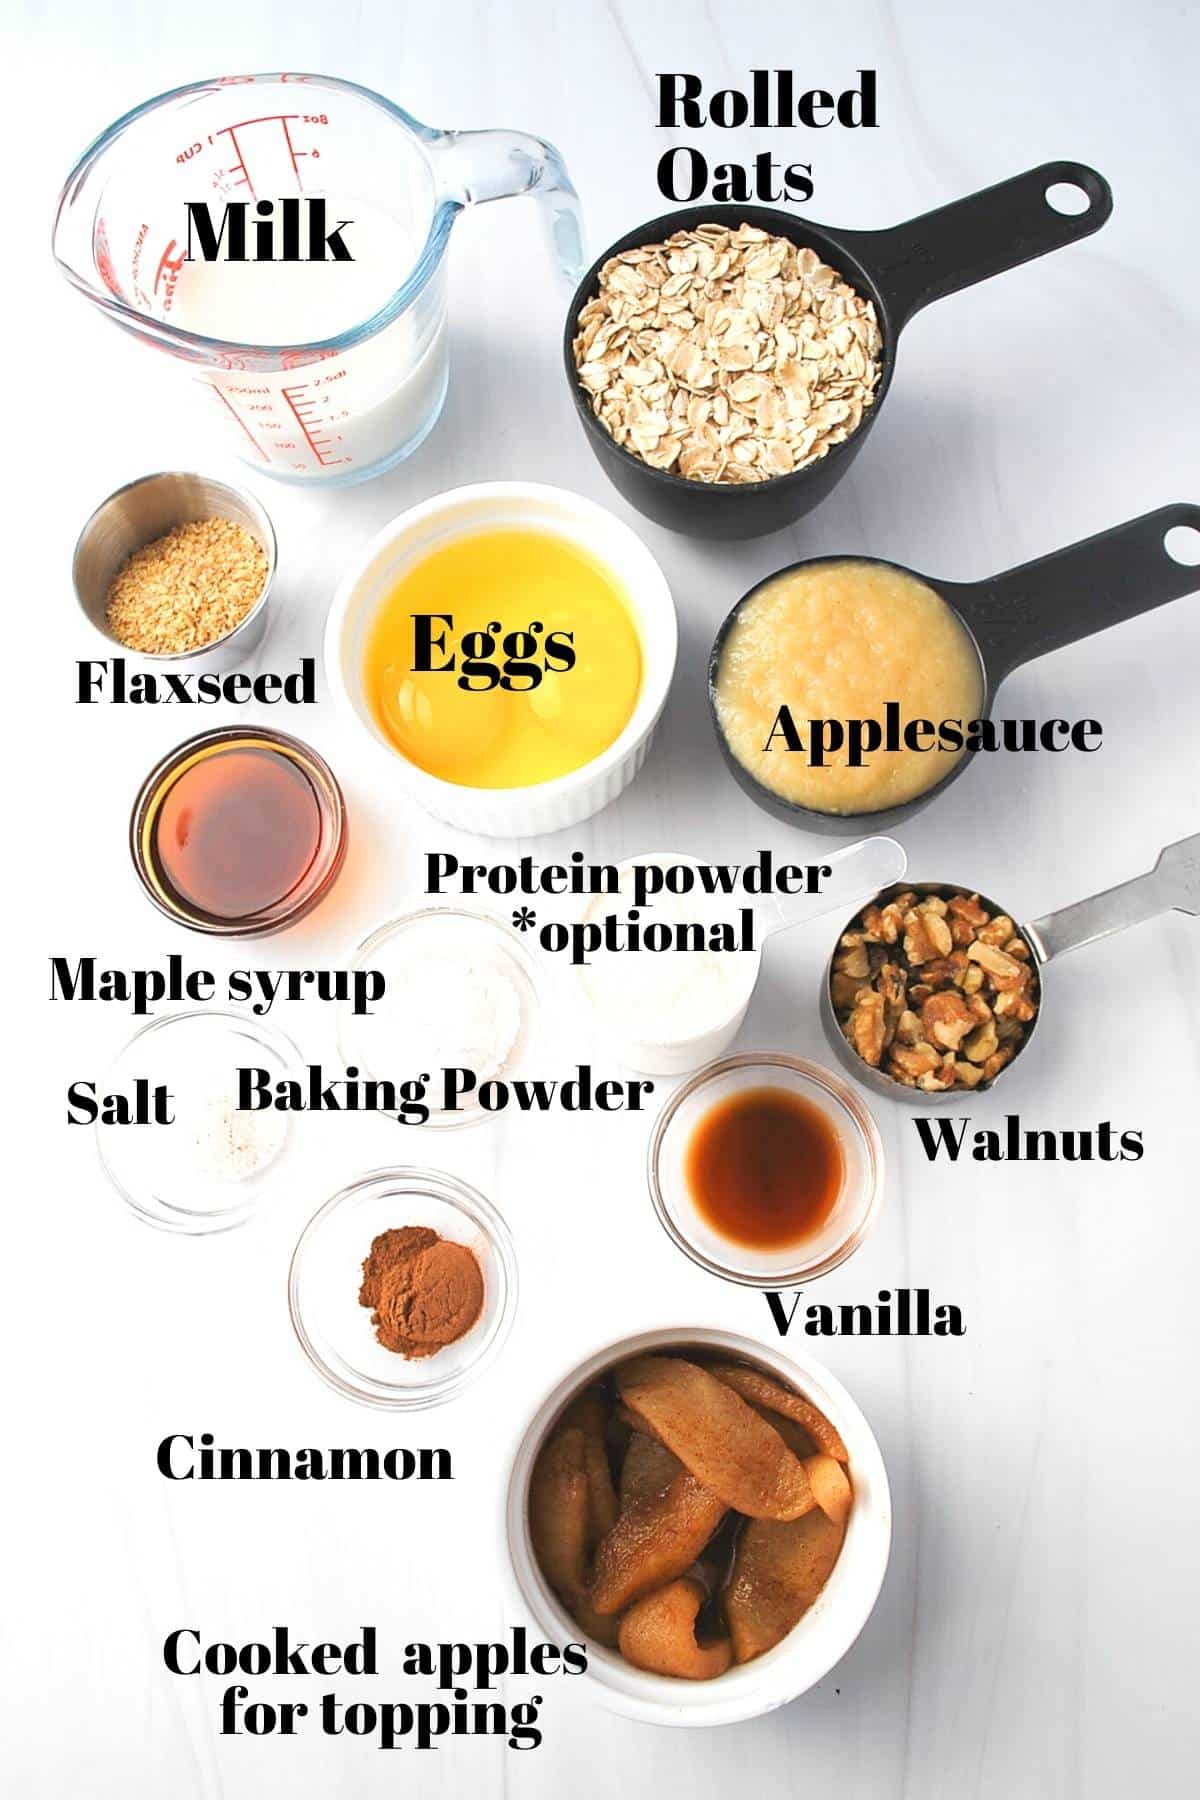 ingredients for apple pie baked oats measured out into dishes on a counter